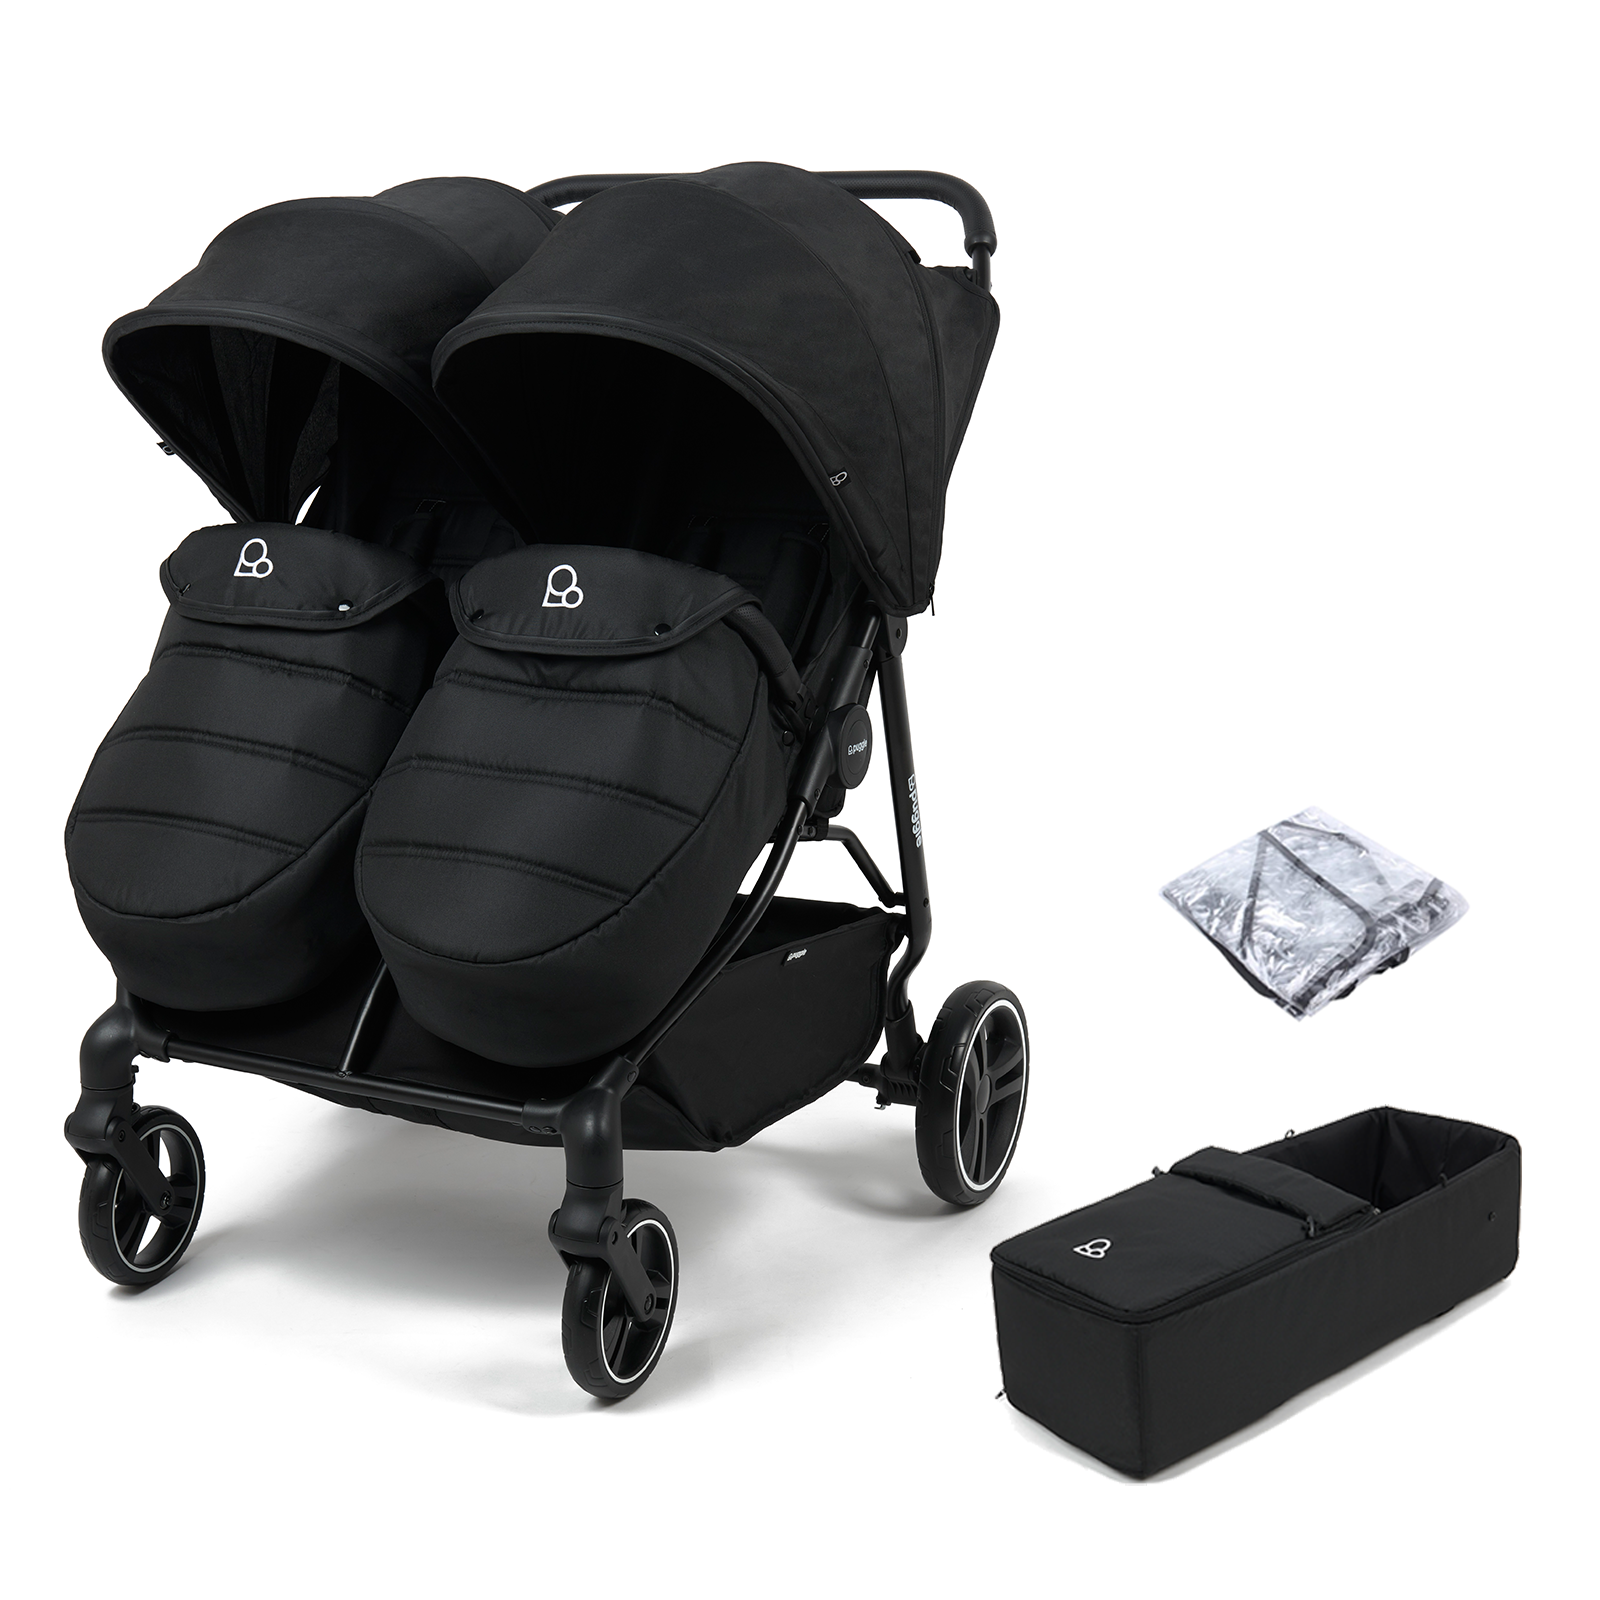 Puggle Urban City Easyfold Twin Double Pushchair with Footmuff & Soft Carrycot - Storm Black